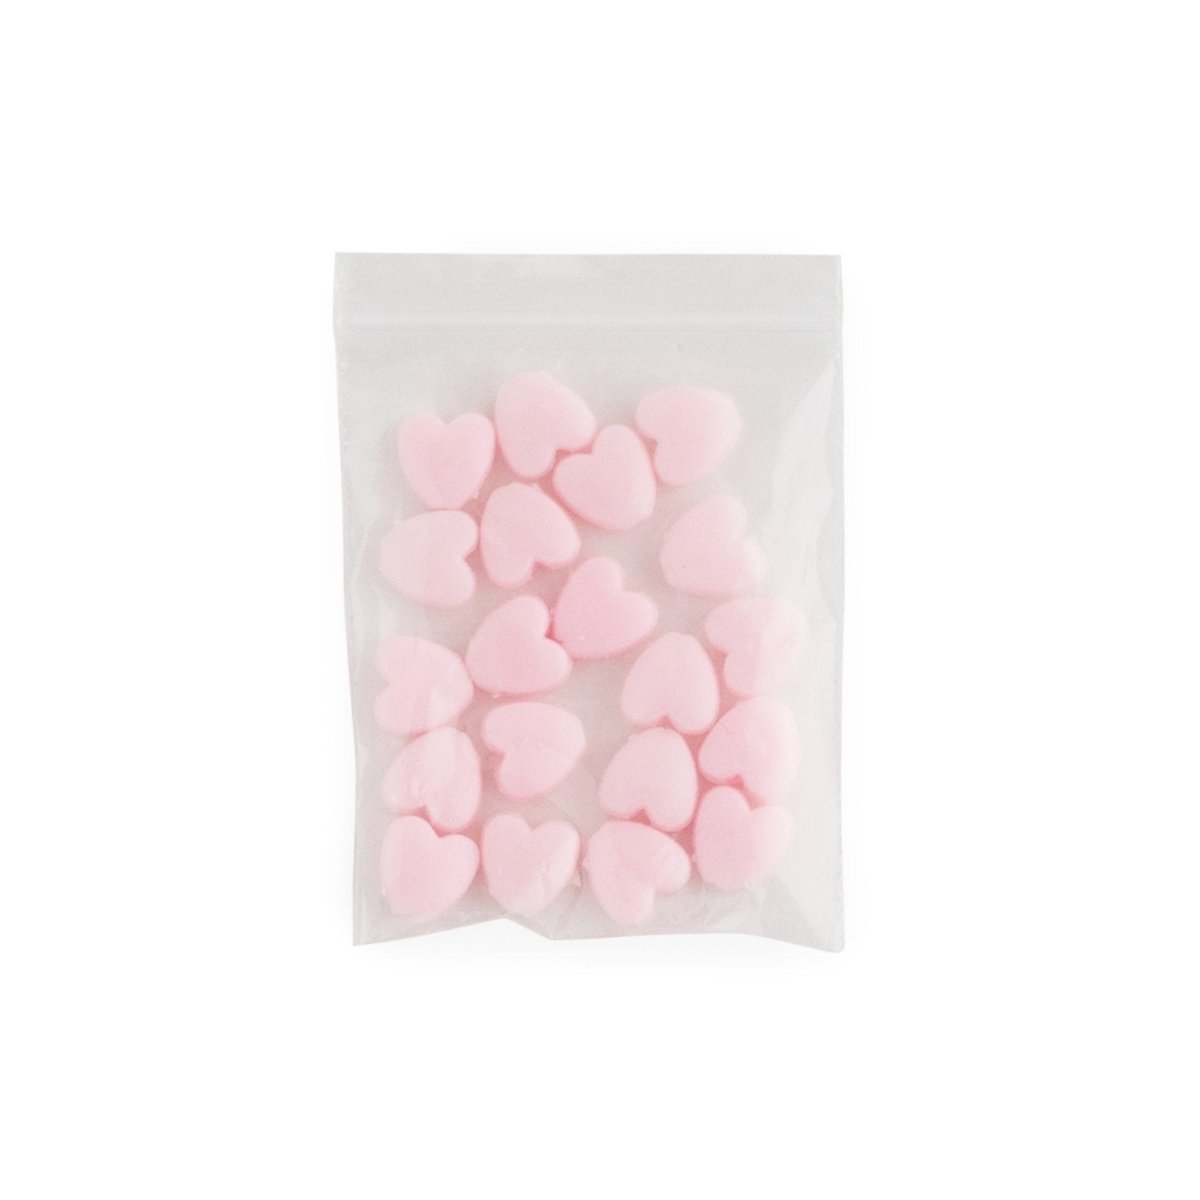 Accent Beads Hearts Mini Light Pink from Cara & Co Craft Supply